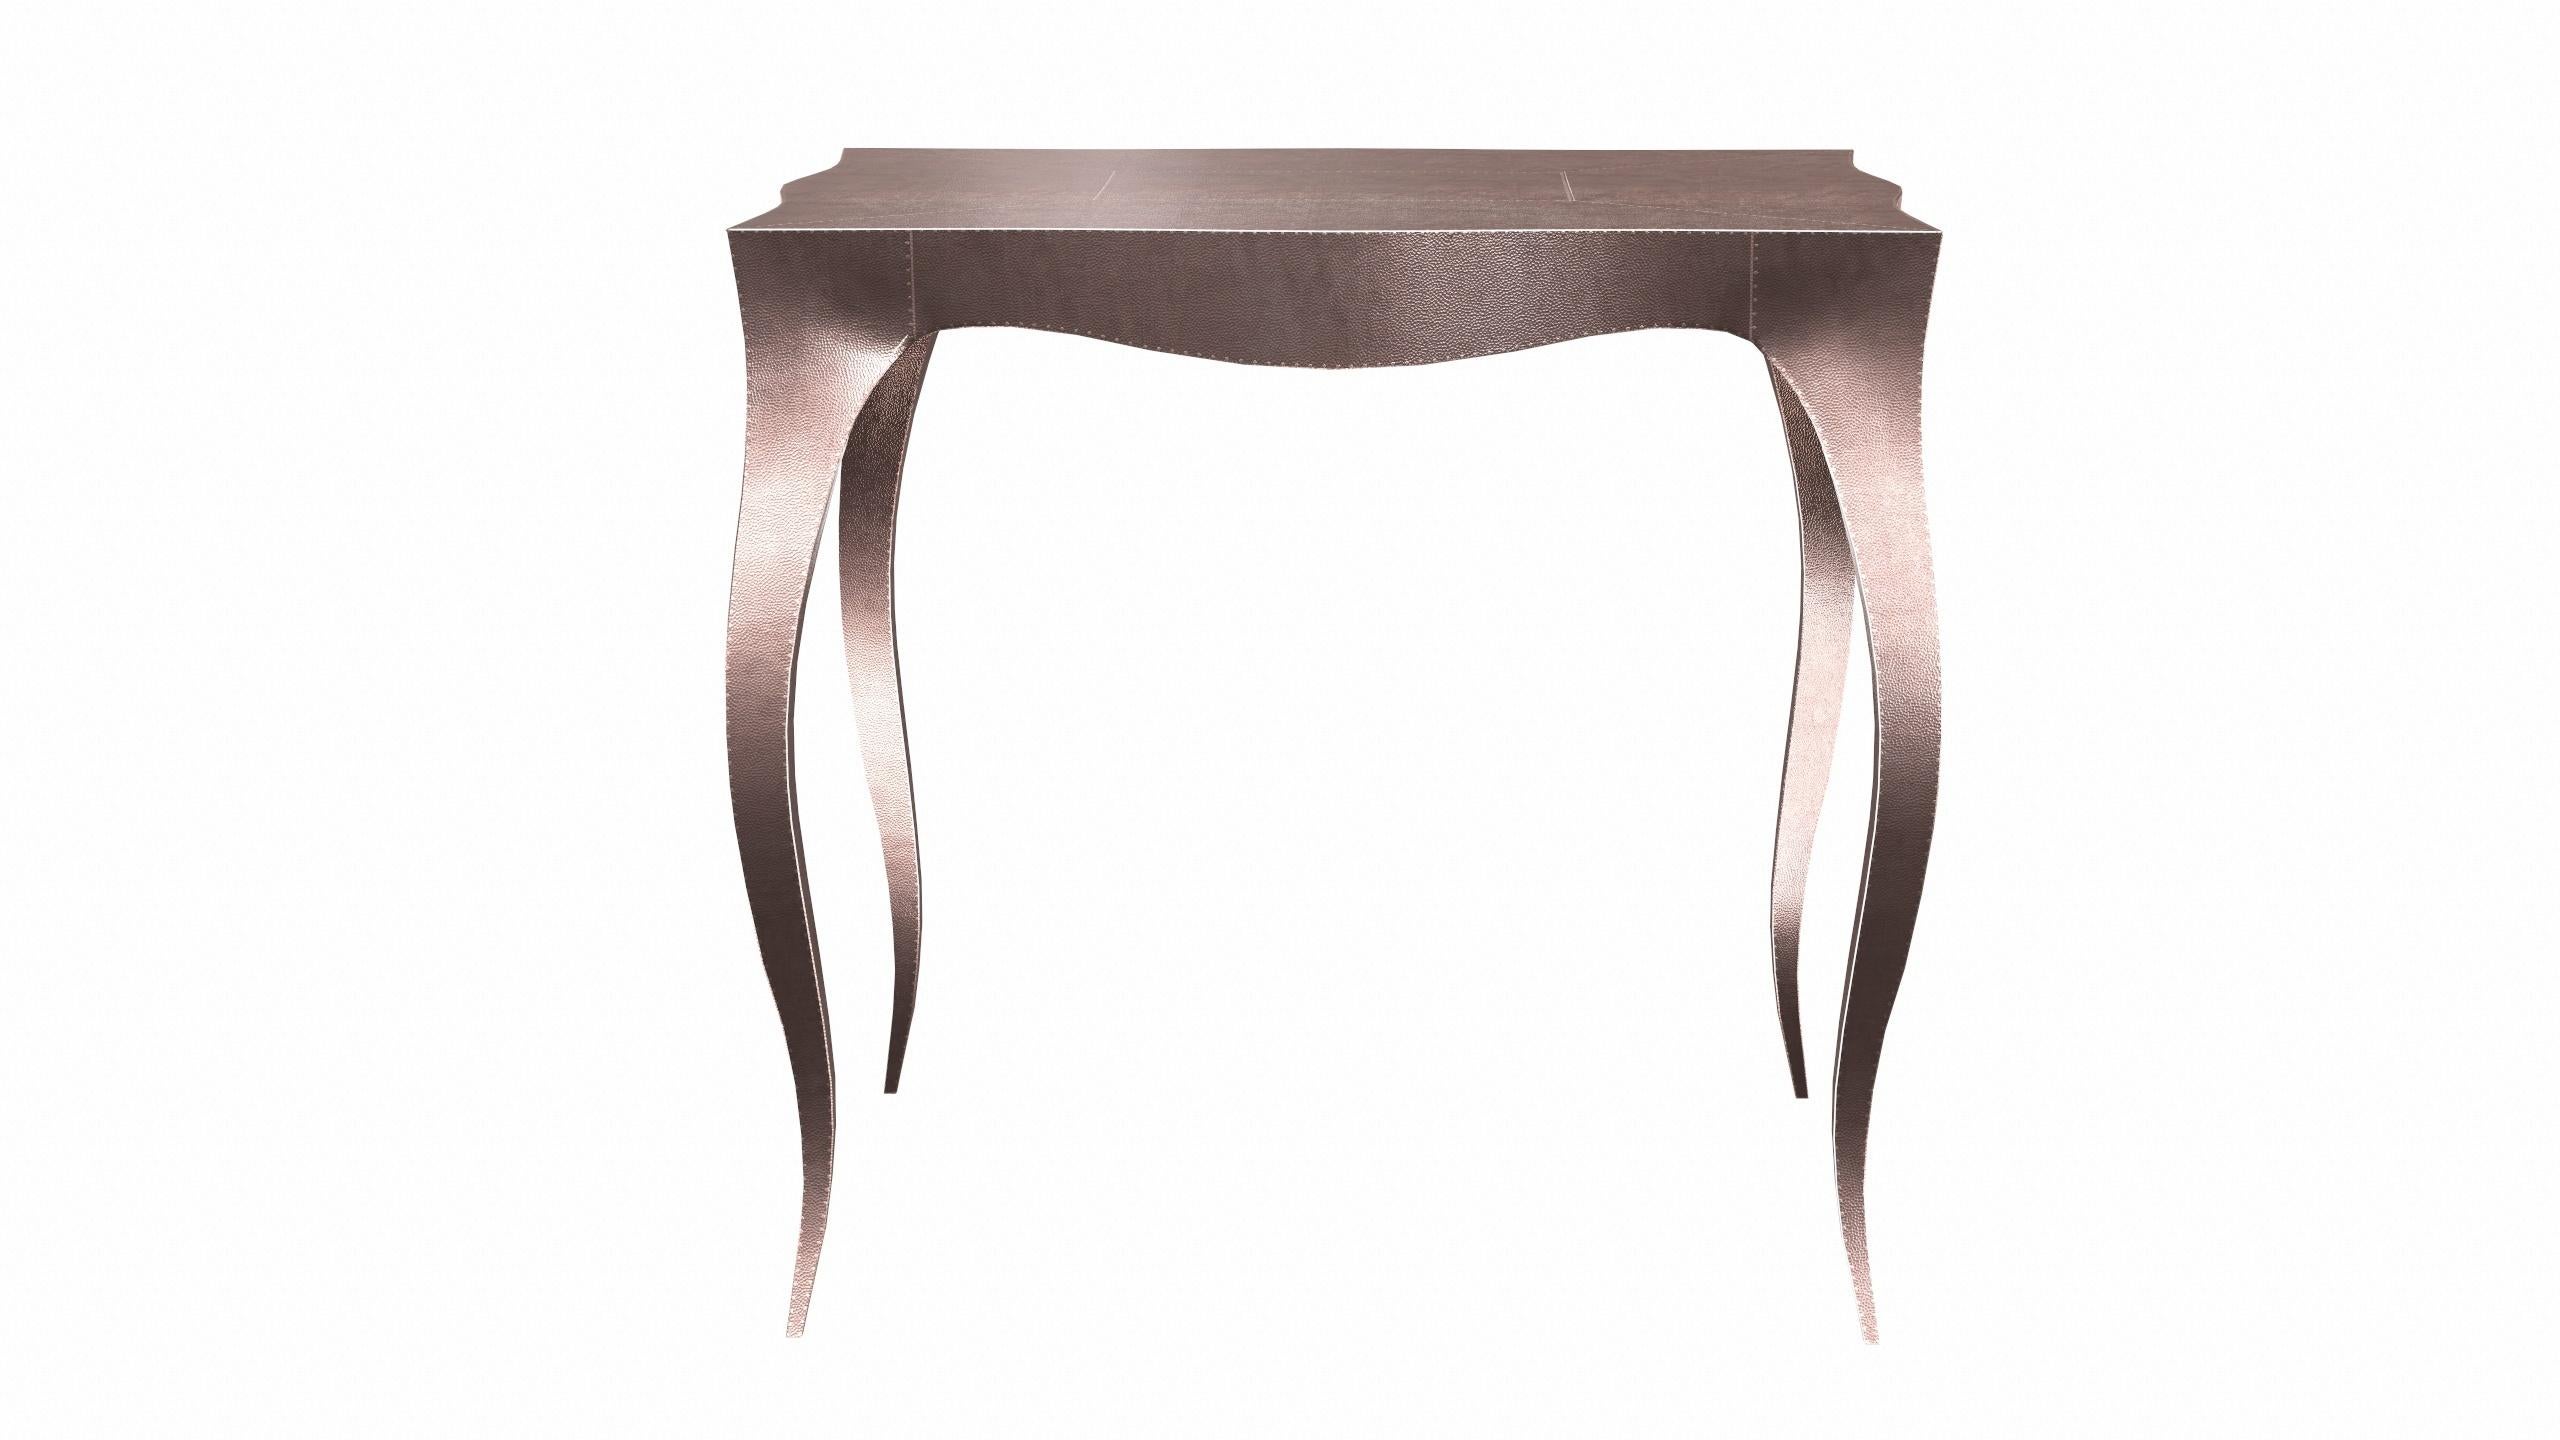 Metal Louise Art Deco Game Tables Mid. Hammered Copper by Paul Mathieu For S. Odegard For Sale